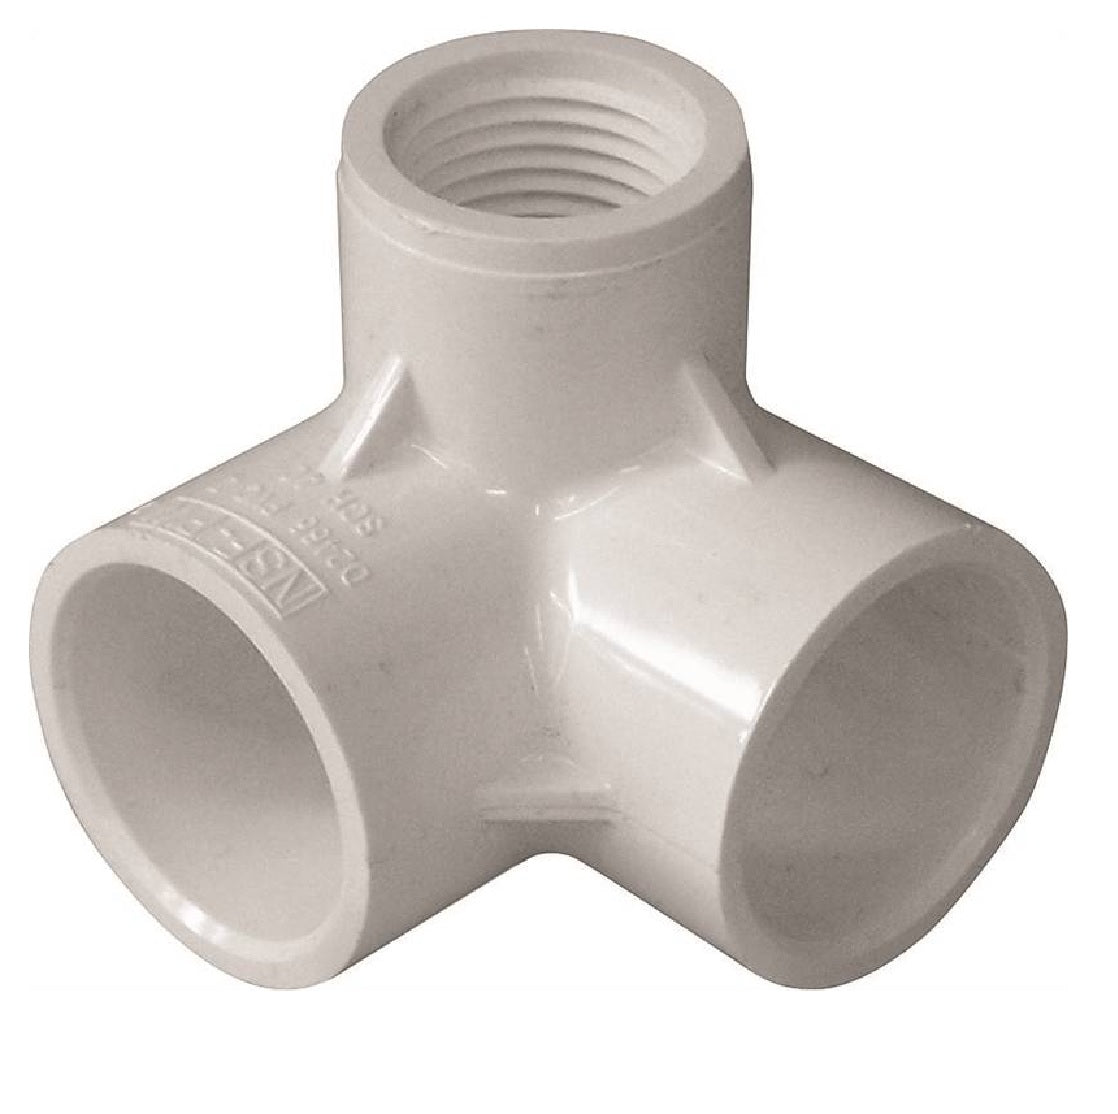 Genova 414130BC 300 Series 90 Degree Pipe Elbow with Side Inlet, White